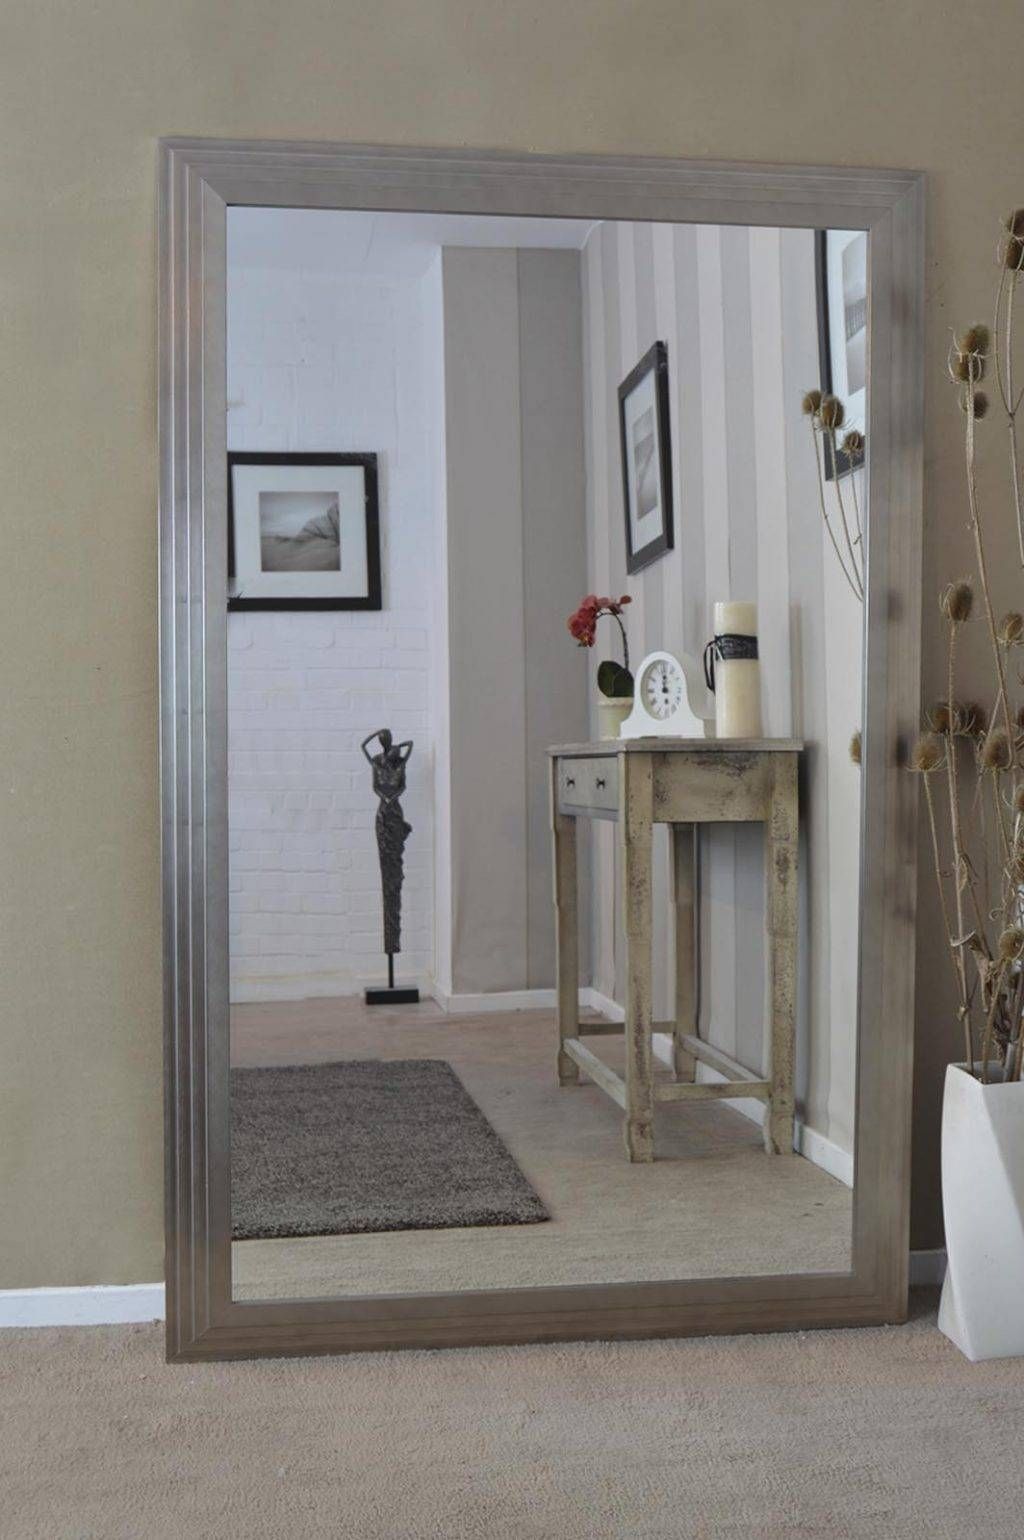 Long Mirrors For Walls 75 Stunning Decor With Large White Antique For Decorative Long Mirrors (View 16 of 25)